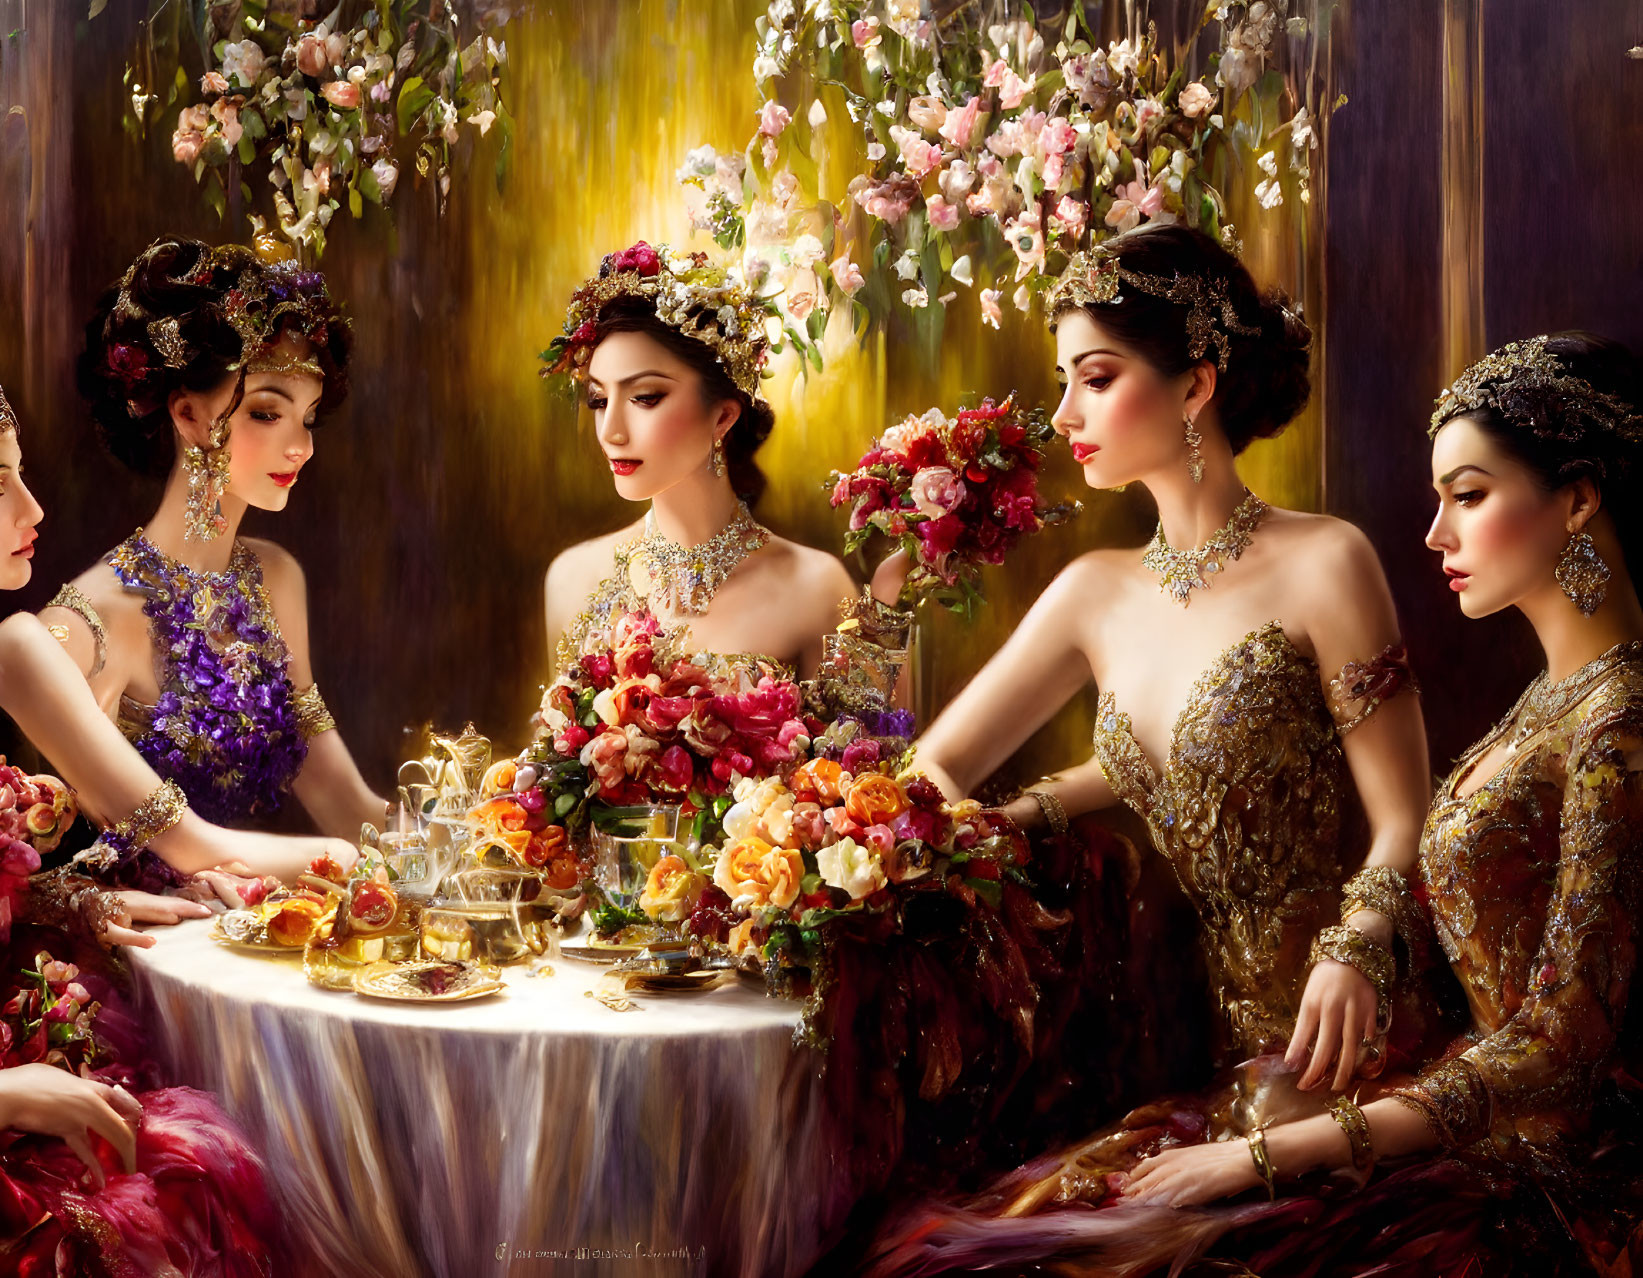 Elegantly Dressed Women at Table with Flowers